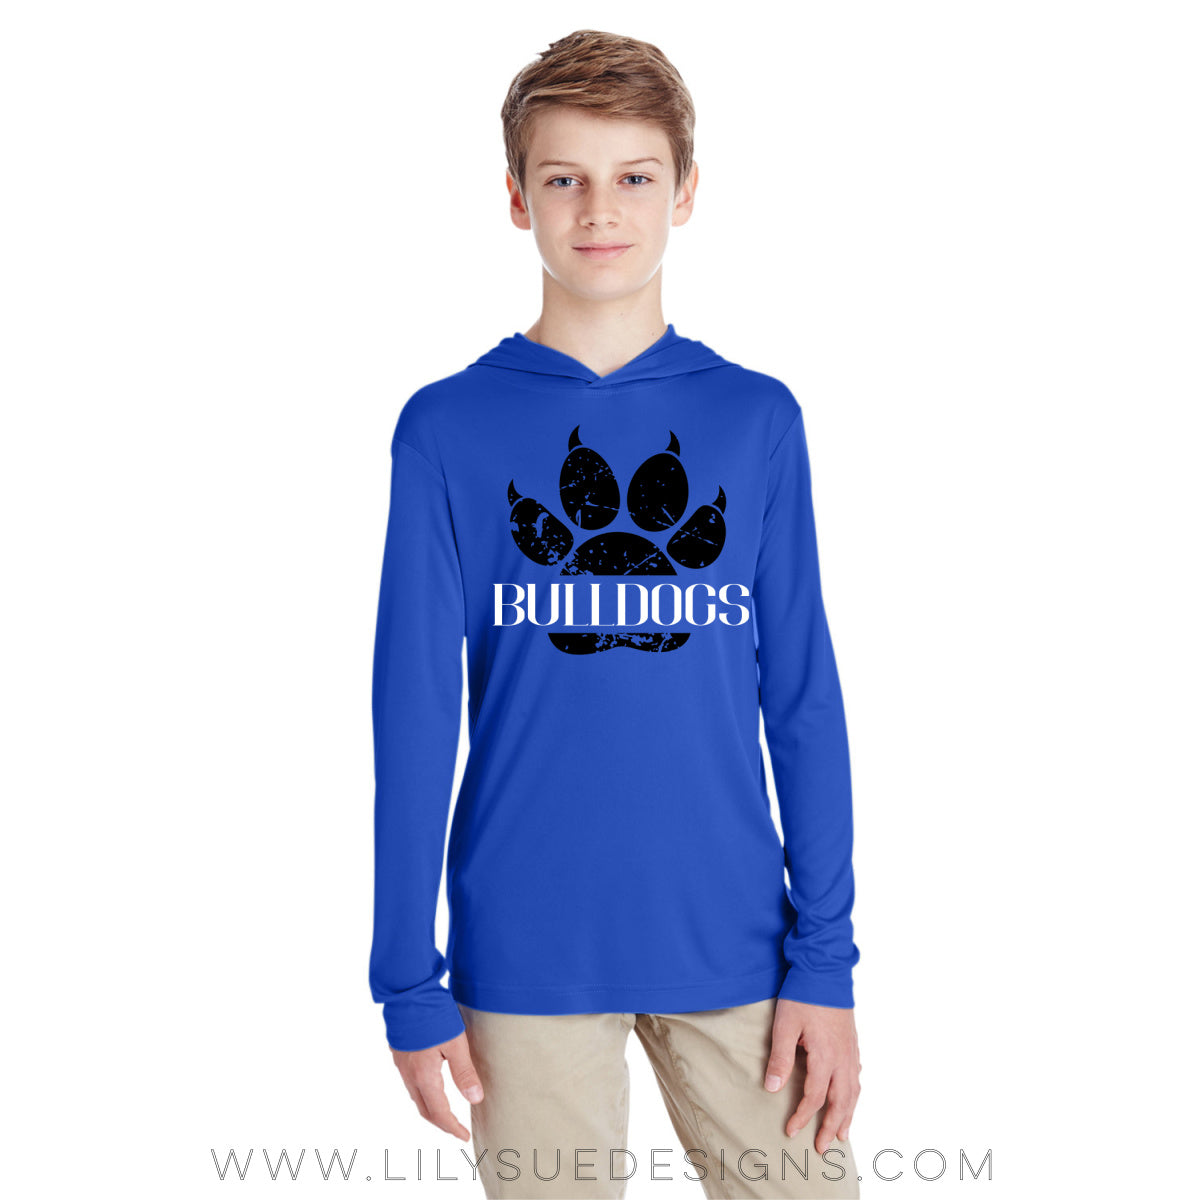 Youth Athletic hooded Long Sleeve